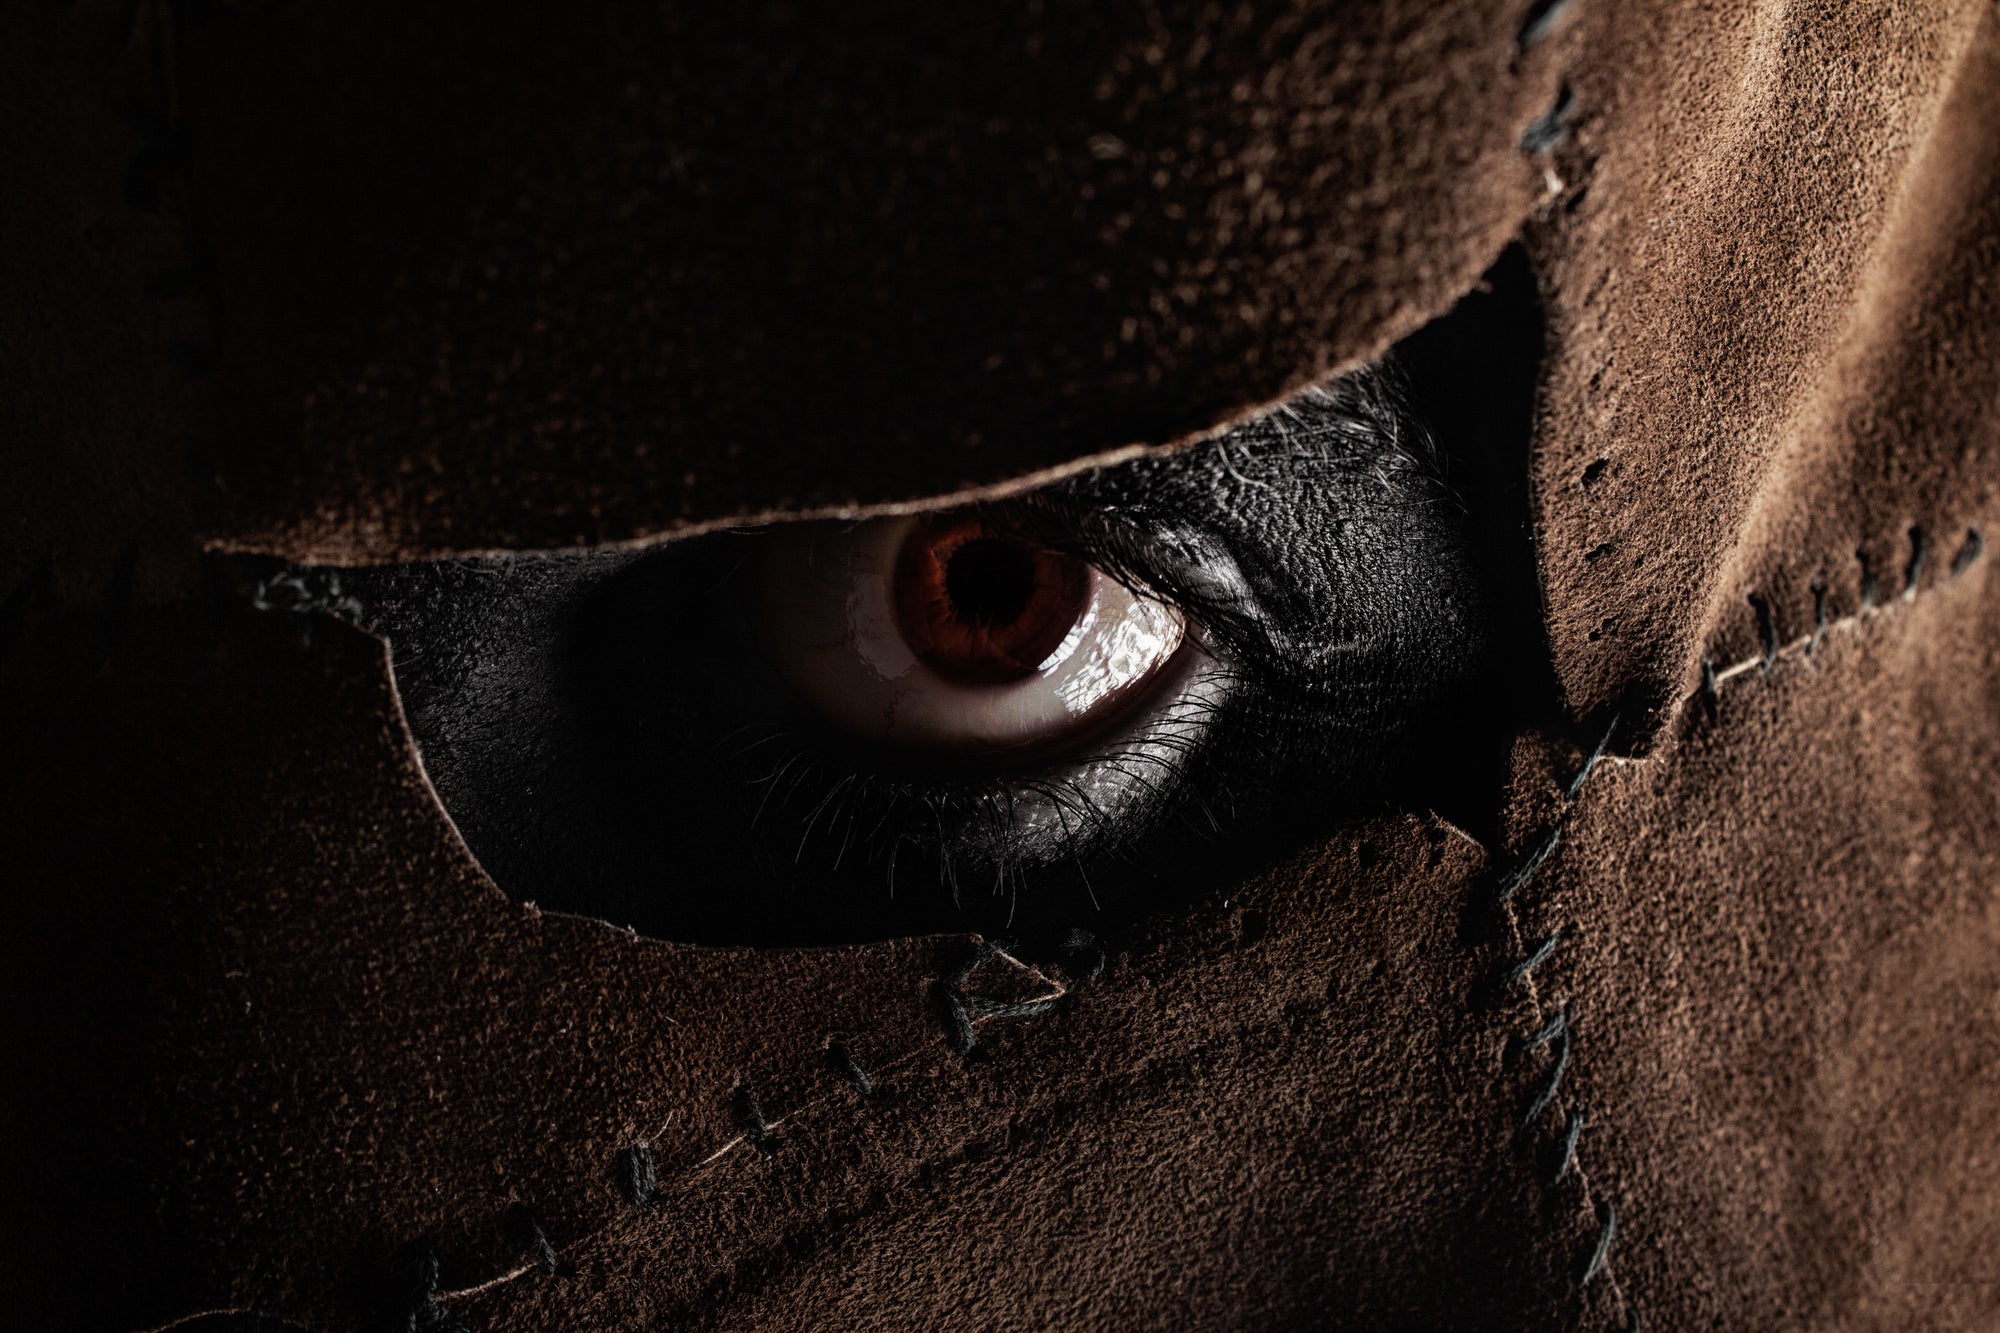 A close-up picture of Leatherface’s eye in his mask.